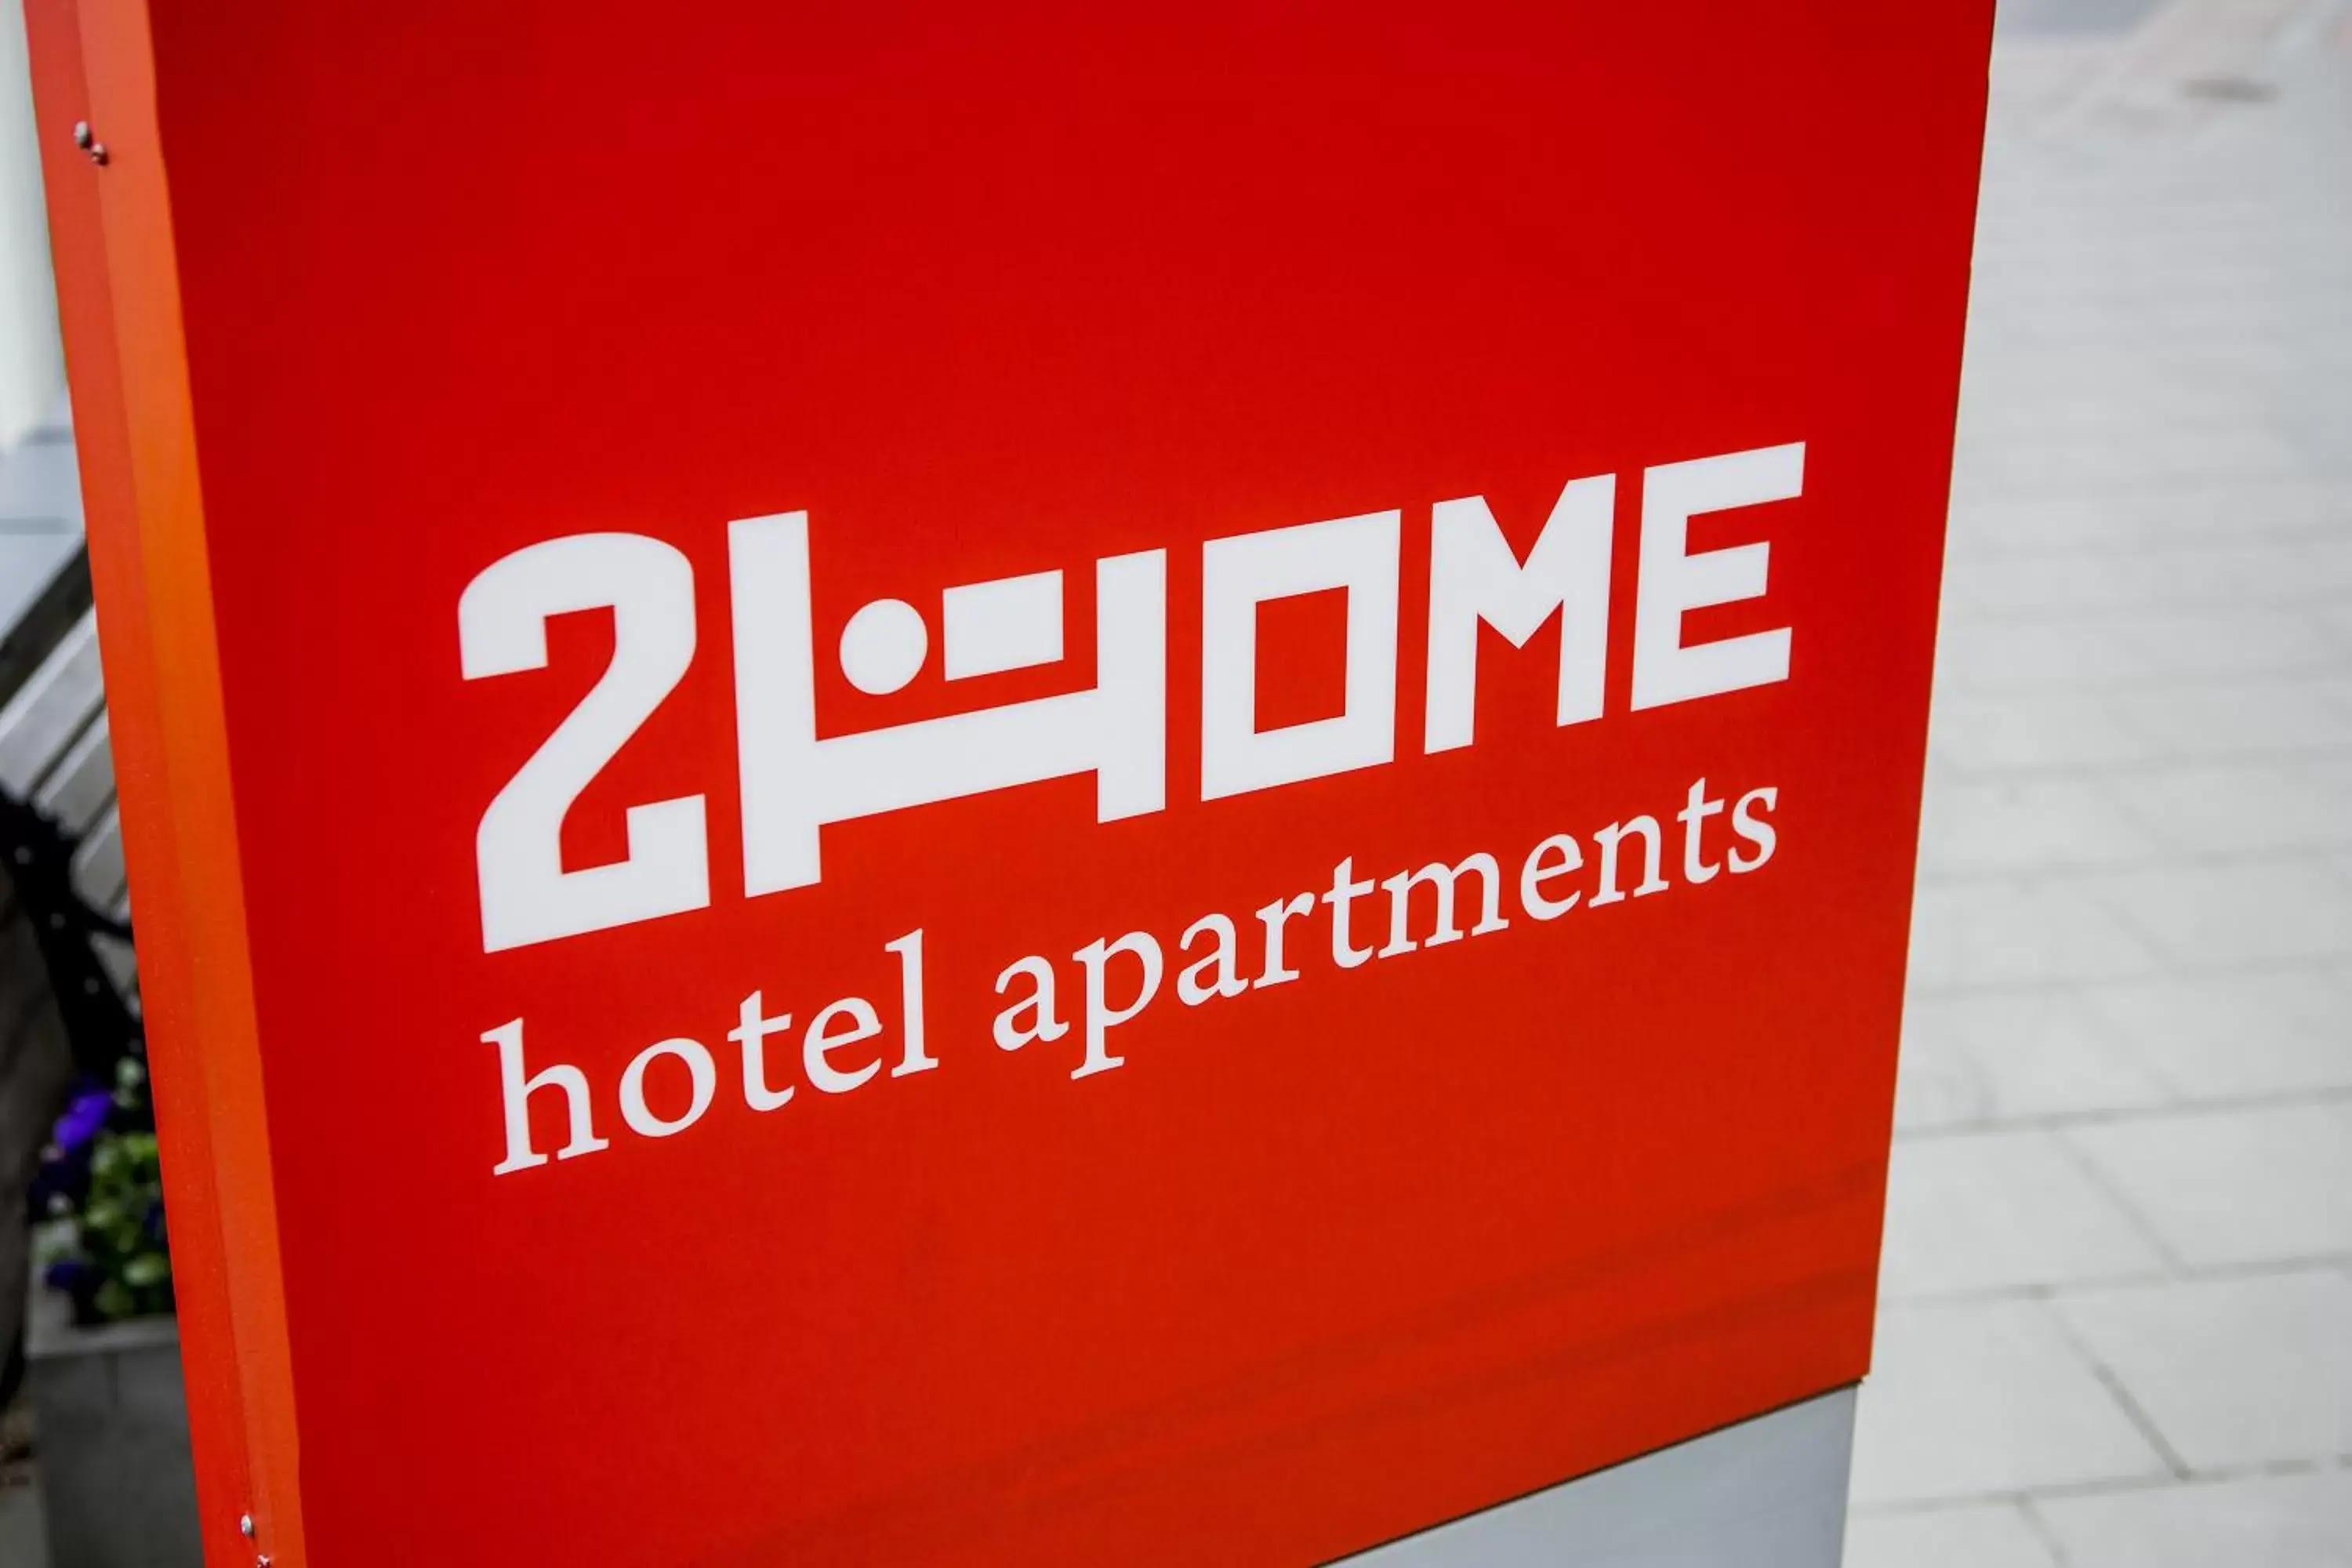 Property logo or sign in 2Home Hotel Apartments